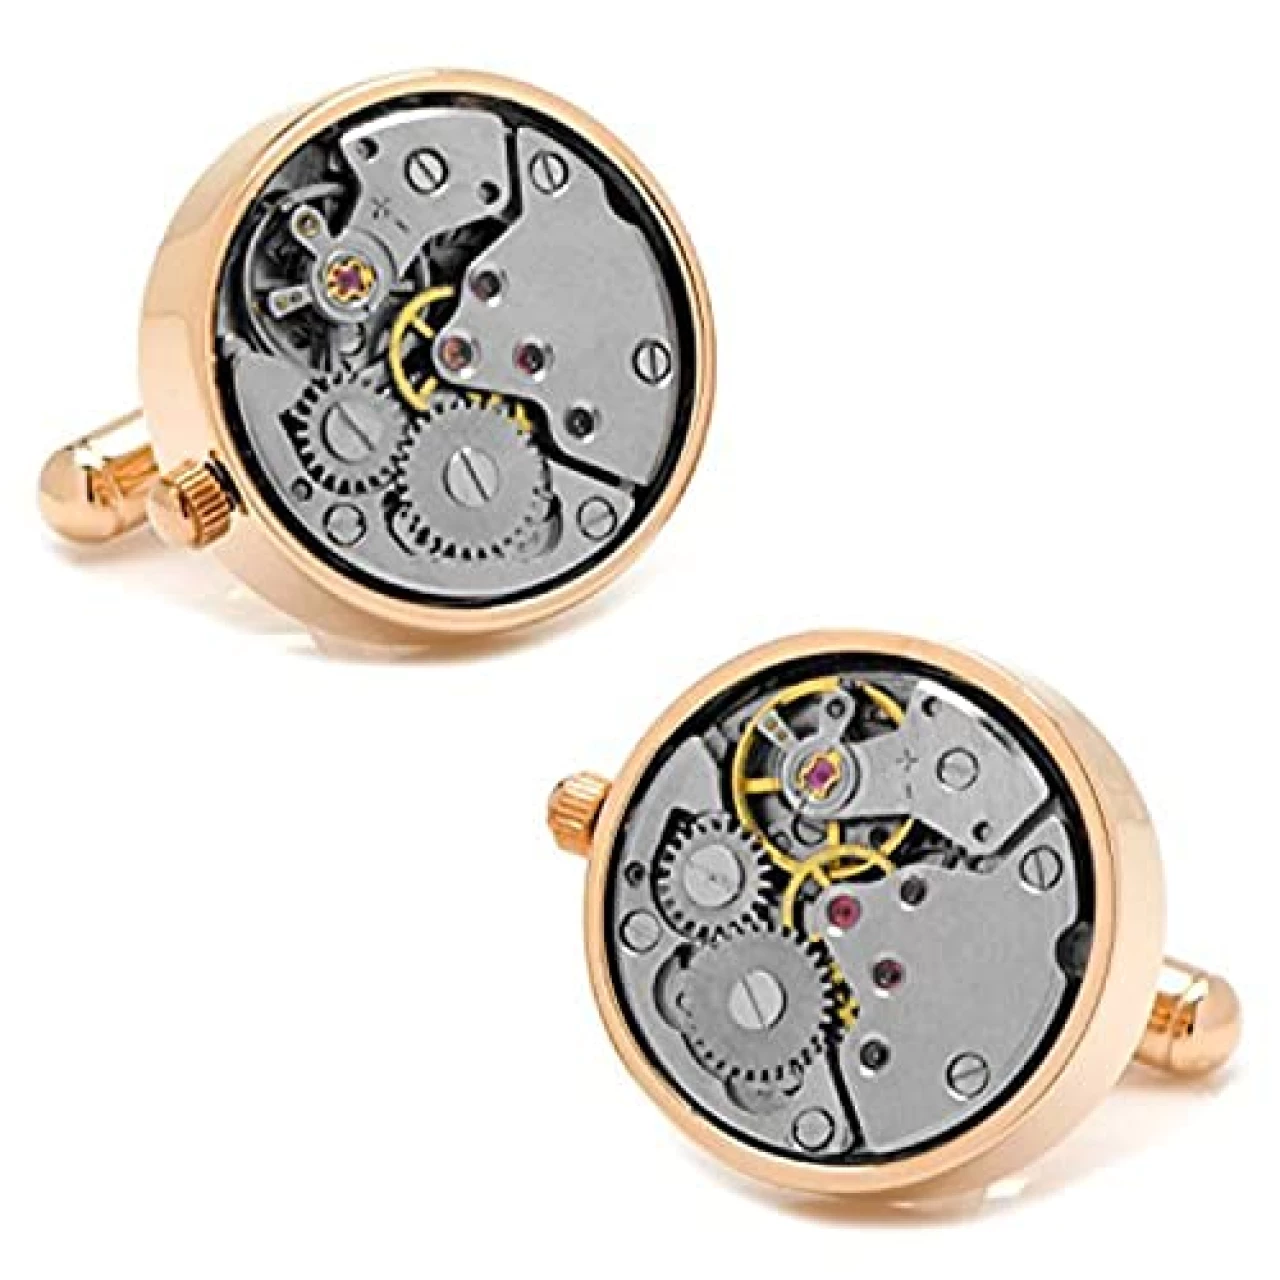 Ox and Bull Trading Co. Rose Gold Watch Movement Cufflinks